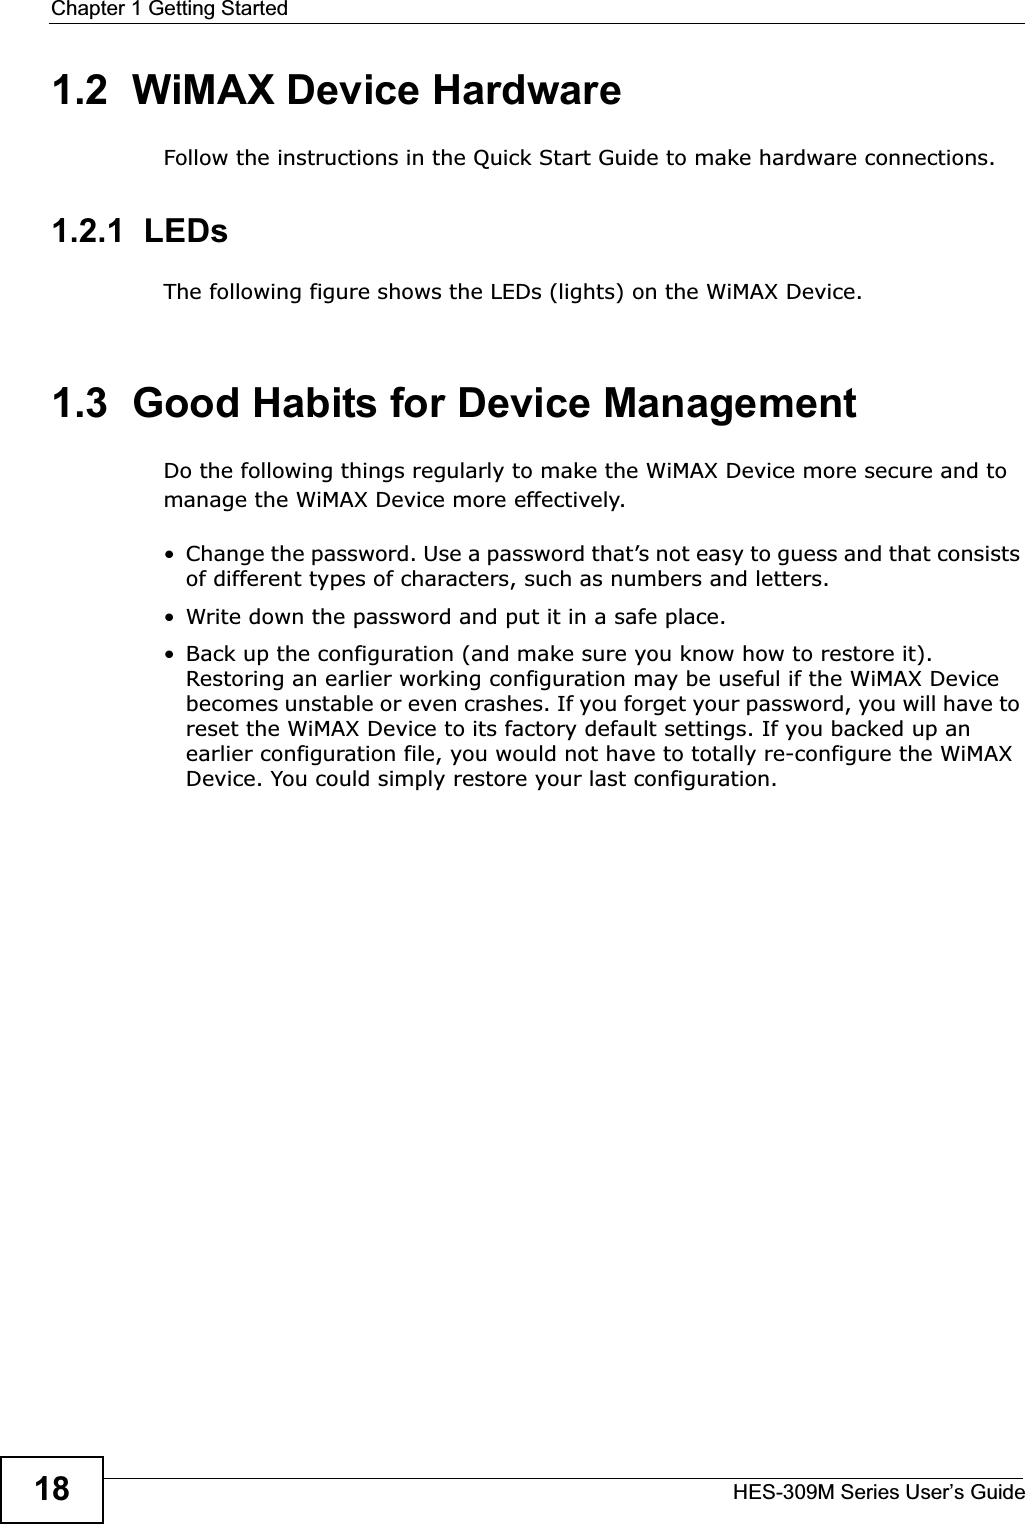 Chapter 1 Getting StartedHES-309M Series User’s Guide181.2  WiMAX Device HardwareFollow the instructions in the Quick Start Guide to make hardware connections.1.2.1  LEDsThe following figure shows the LEDs (lights) on the WiMAX Device.1.3  Good Habits for Device ManagementDo the following things regularly to make the WiMAX Device more secure and to manage the WiMAX Device more effectively.• Change the password. Use a password that’s not easy to guess and that consists of different types of characters, such as numbers and letters.• Write down the password and put it in a safe place.• Back up the configuration (and make sure you know how to restore it). Restoring an earlier working configuration may be useful if the WiMAX Device becomes unstable or even crashes. If you forget your password, you will have to reset the WiMAX Device to its factory default settings. If you backed up an earlier configuration file, you would not have to totally re-configure the WiMAX Device. You could simply restore your last configuration.